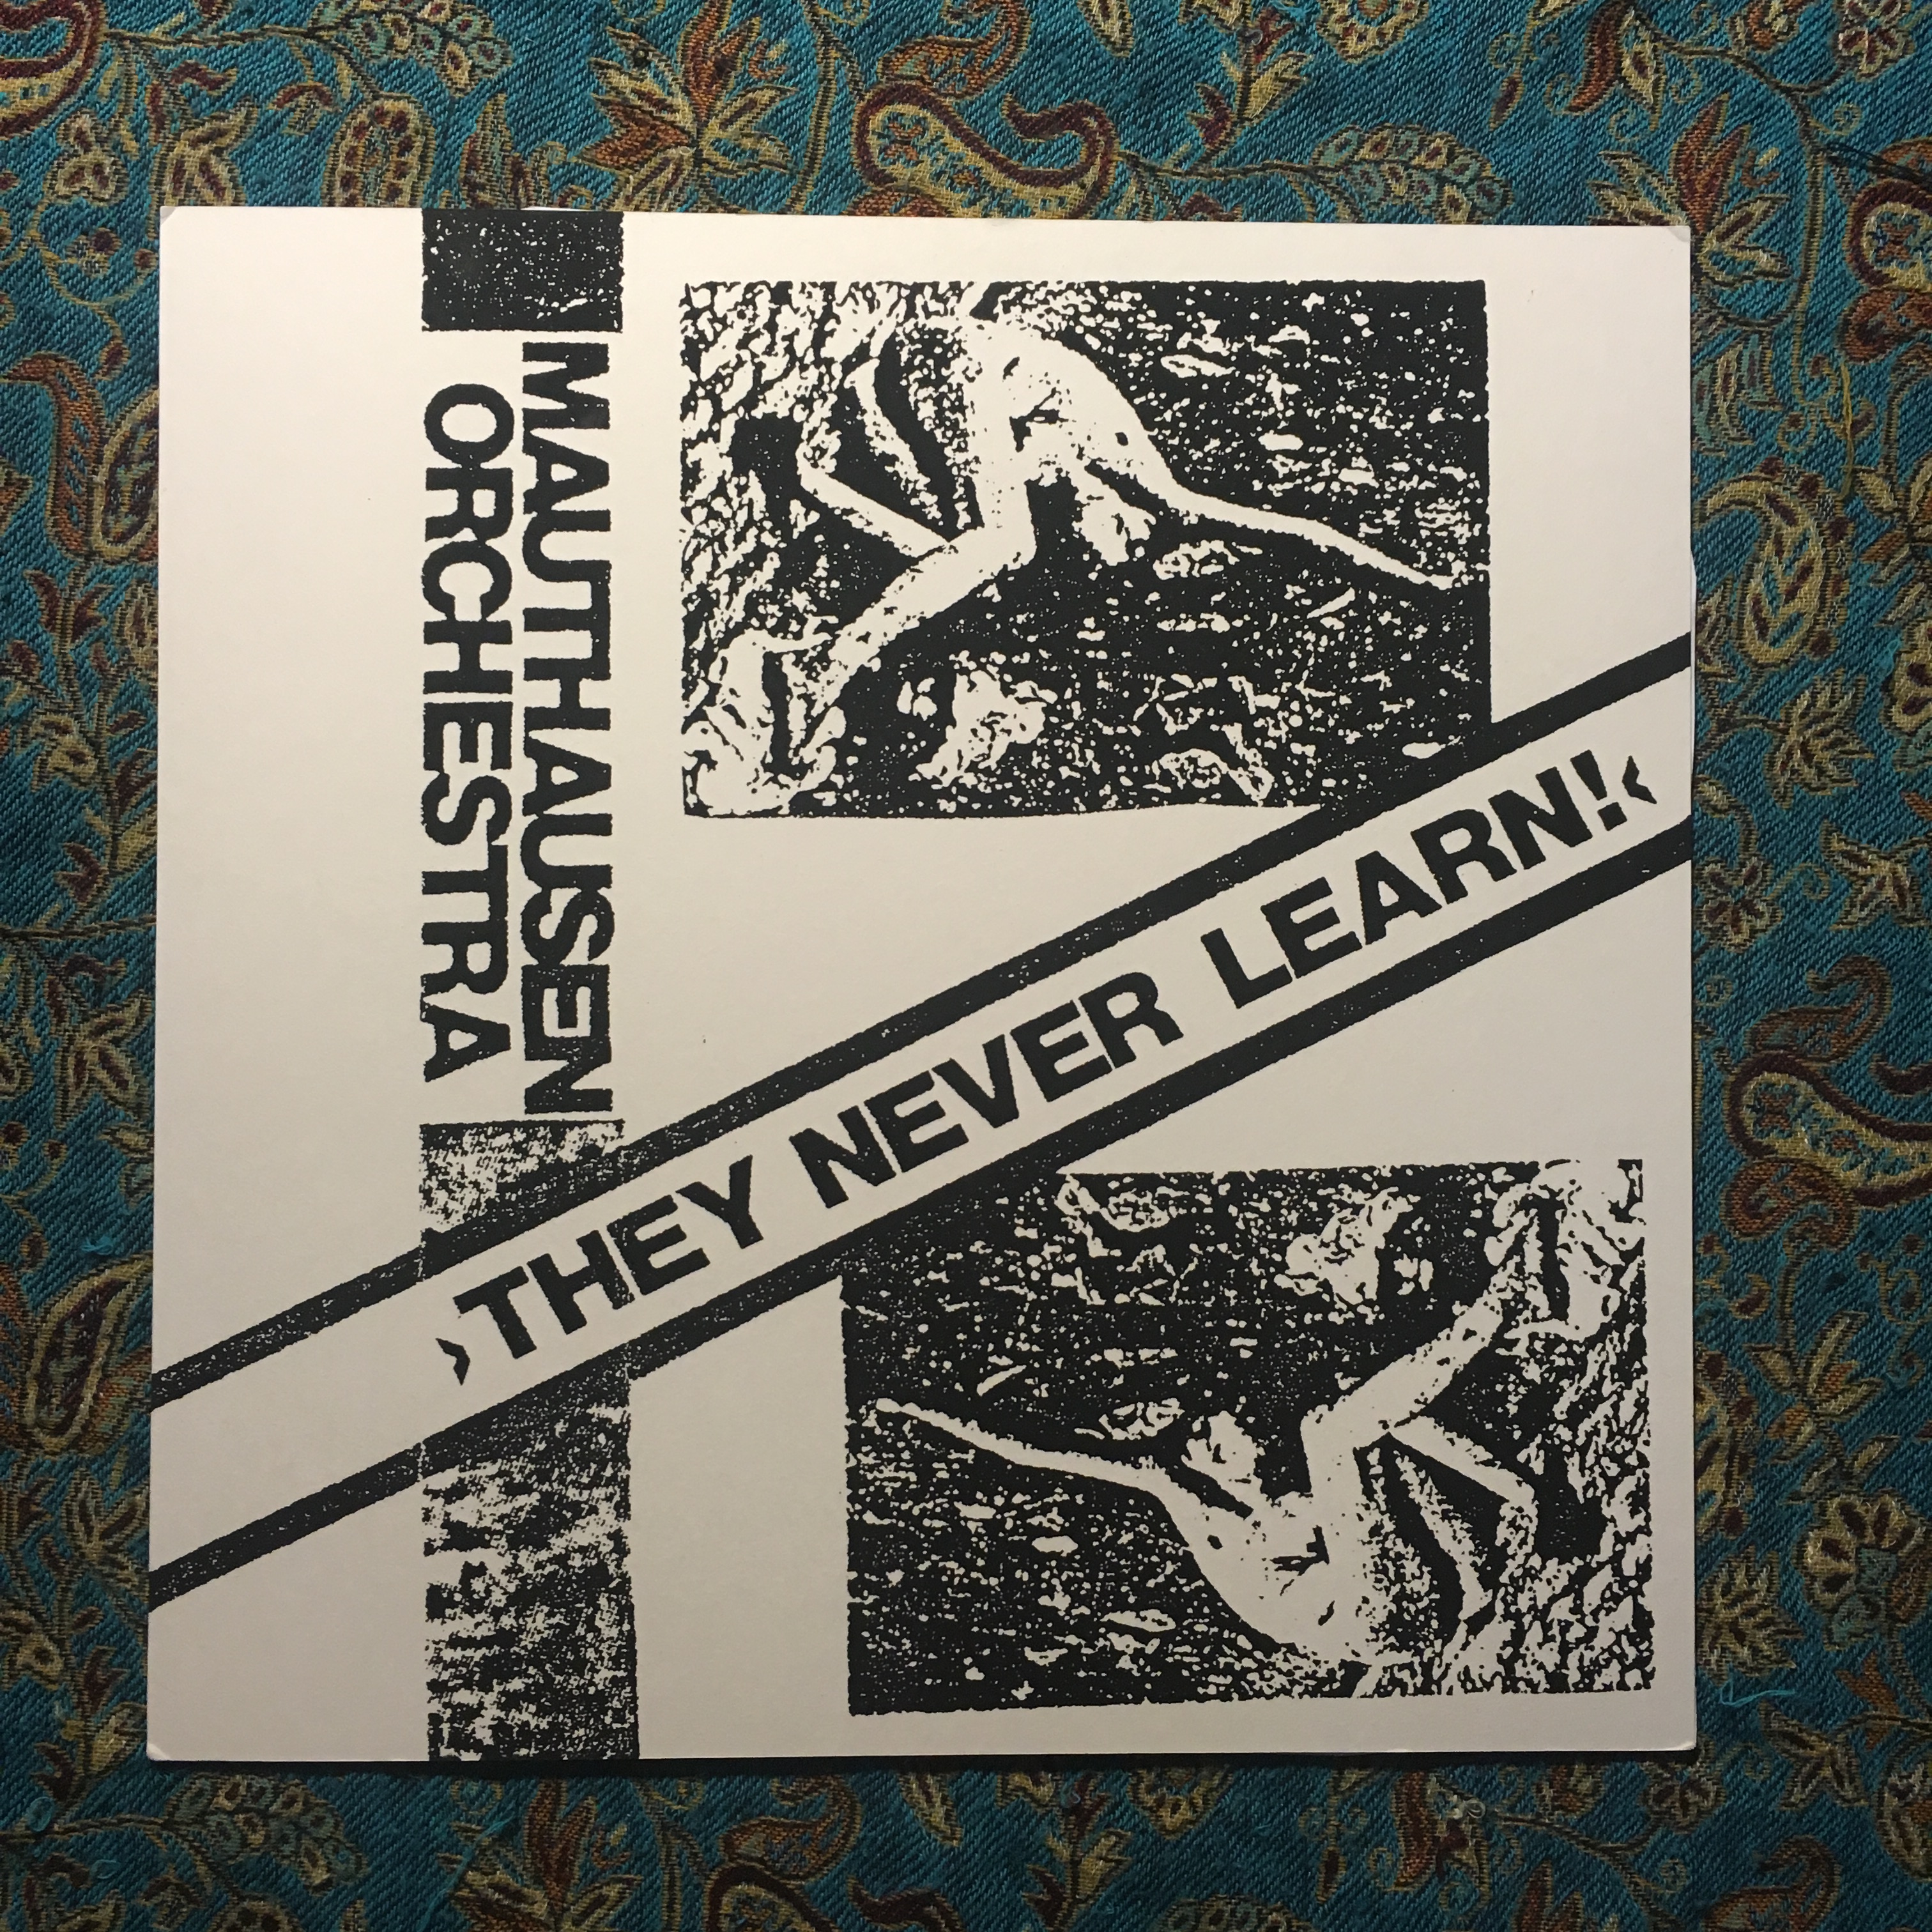 MAUTHAUSEN ORCHESTRA – They Never Learn! LP